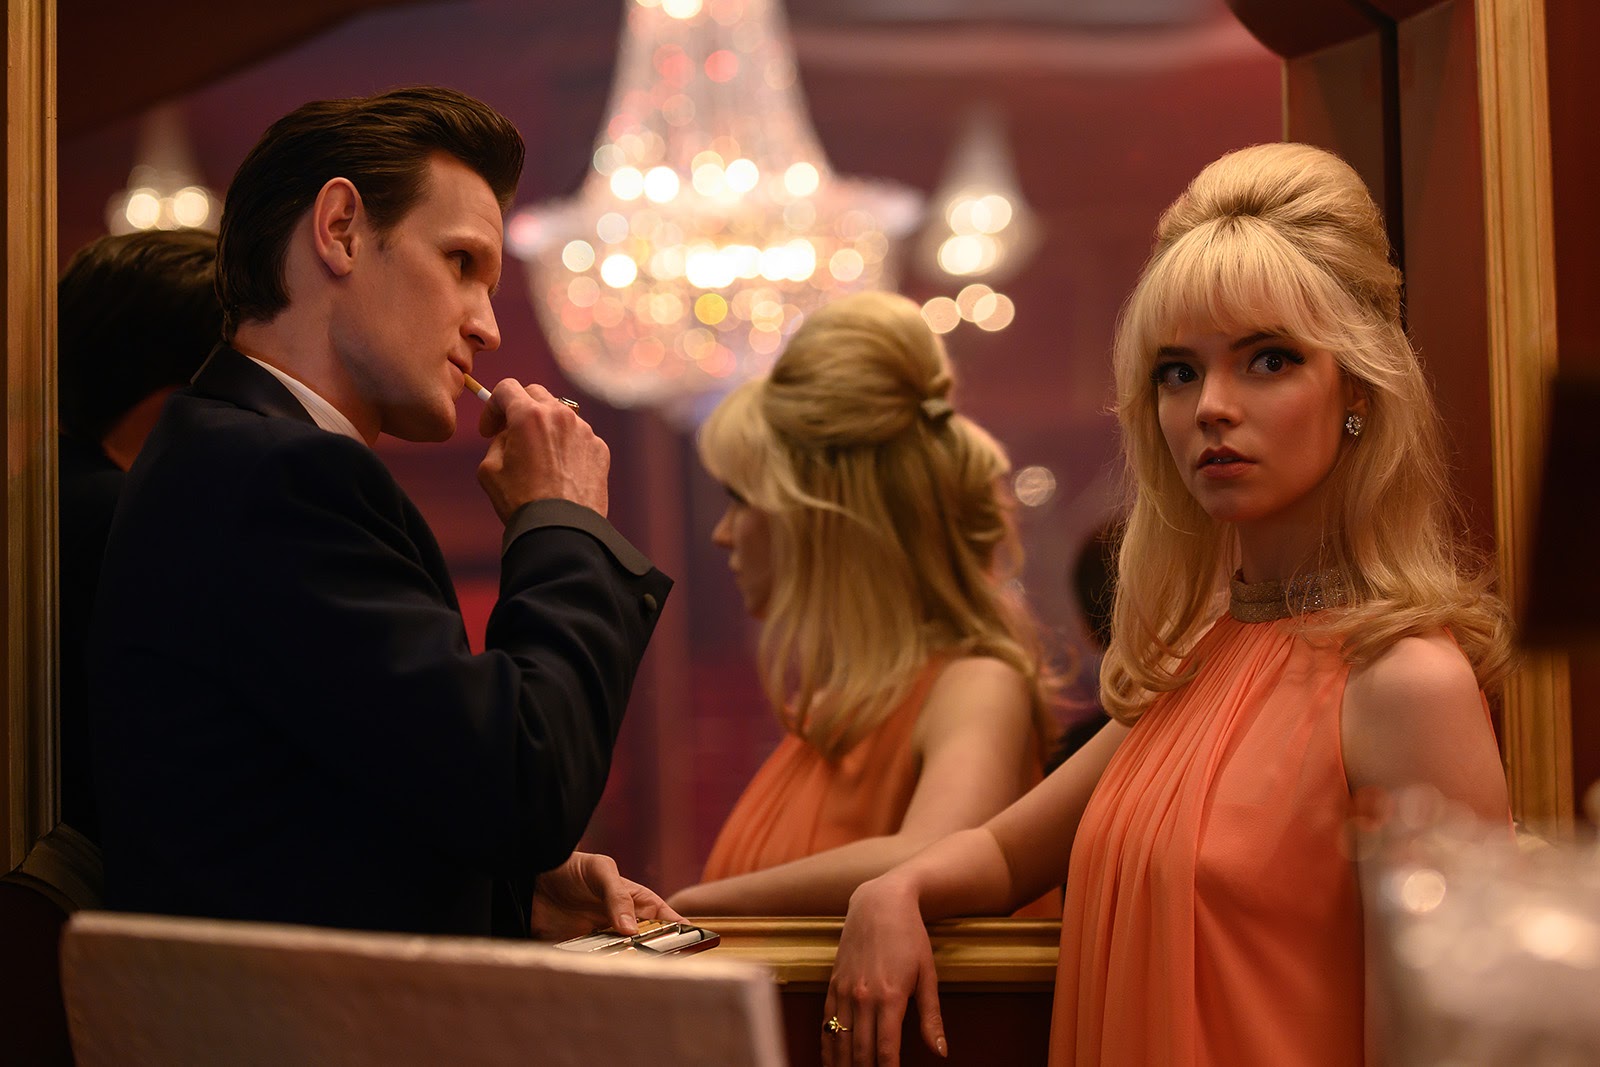 Matt Smith as Jack and Any Taylor-Joy as Sandie in Last Night in Soho. Image © Focus Features